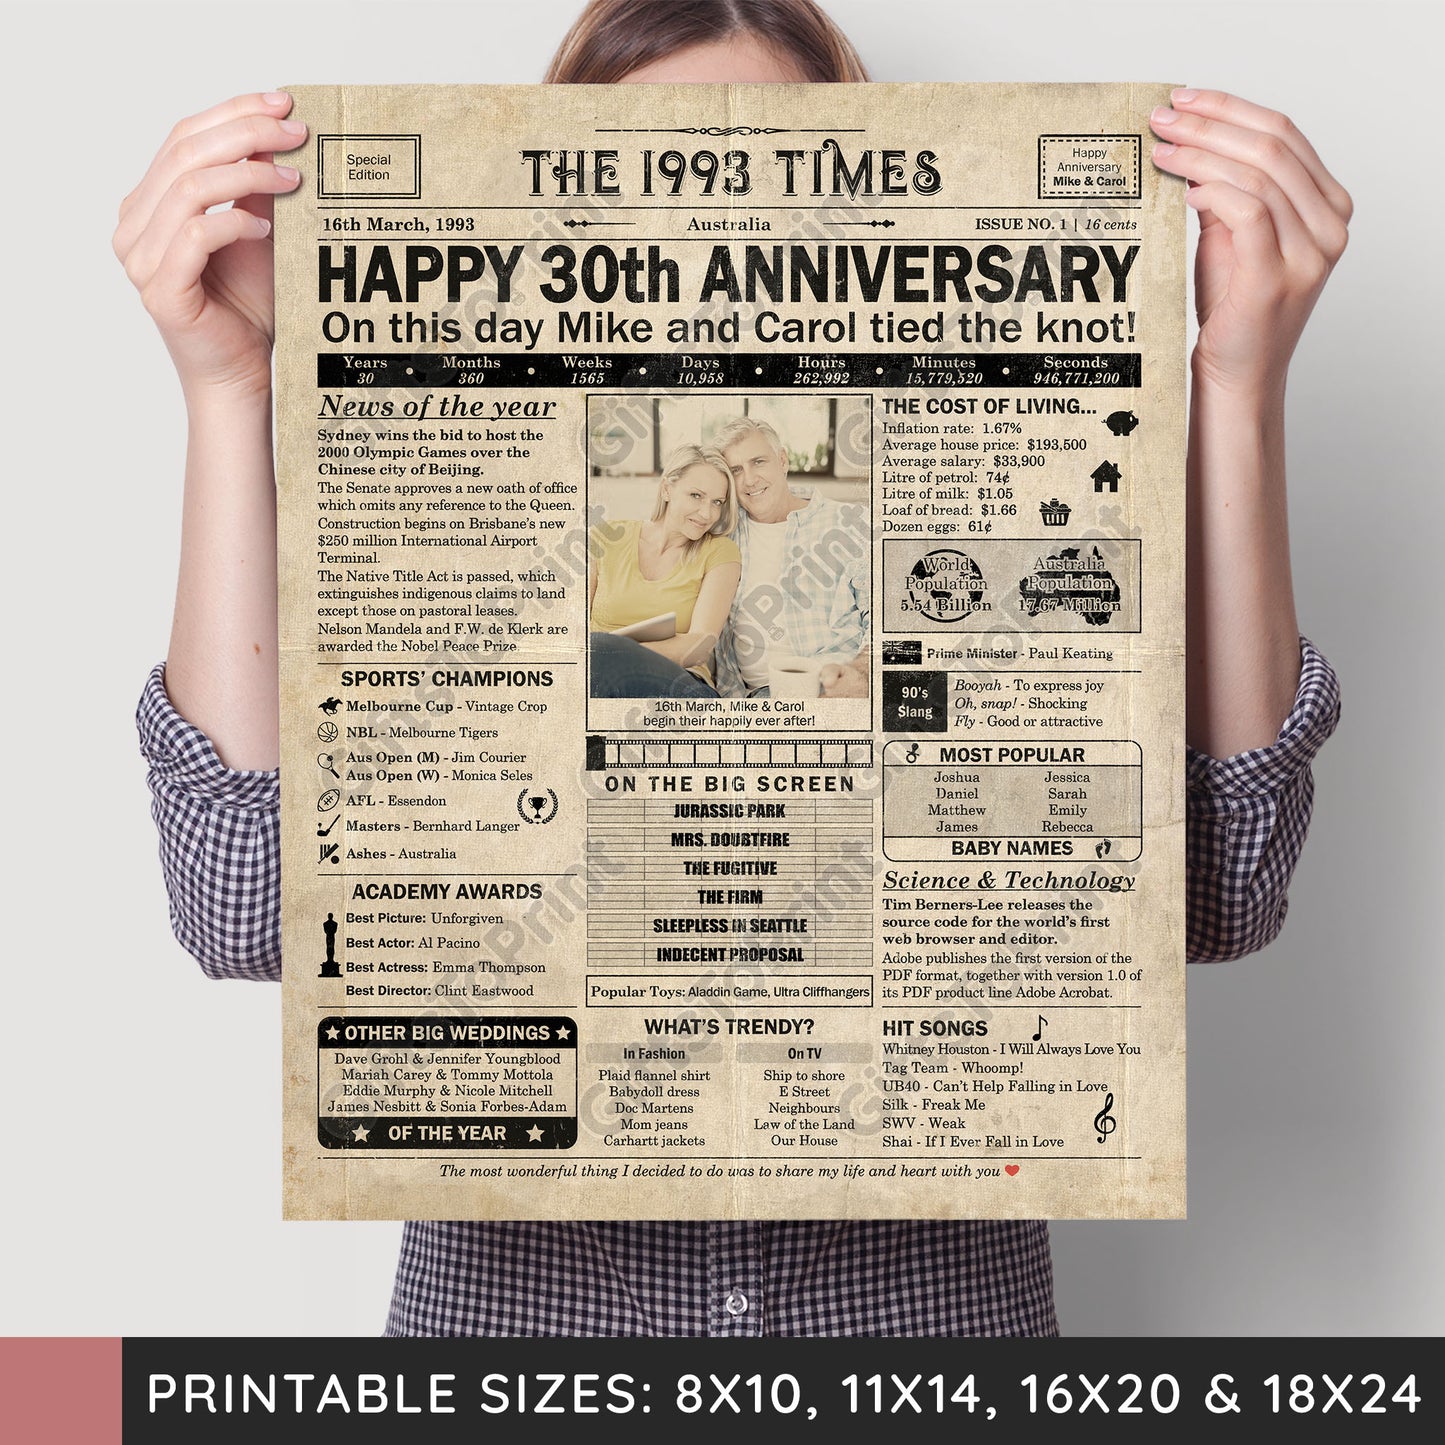 Personalised 30th Anniversary Gift: A Printable AUSTRALIAN Newspaper Poster of 1993